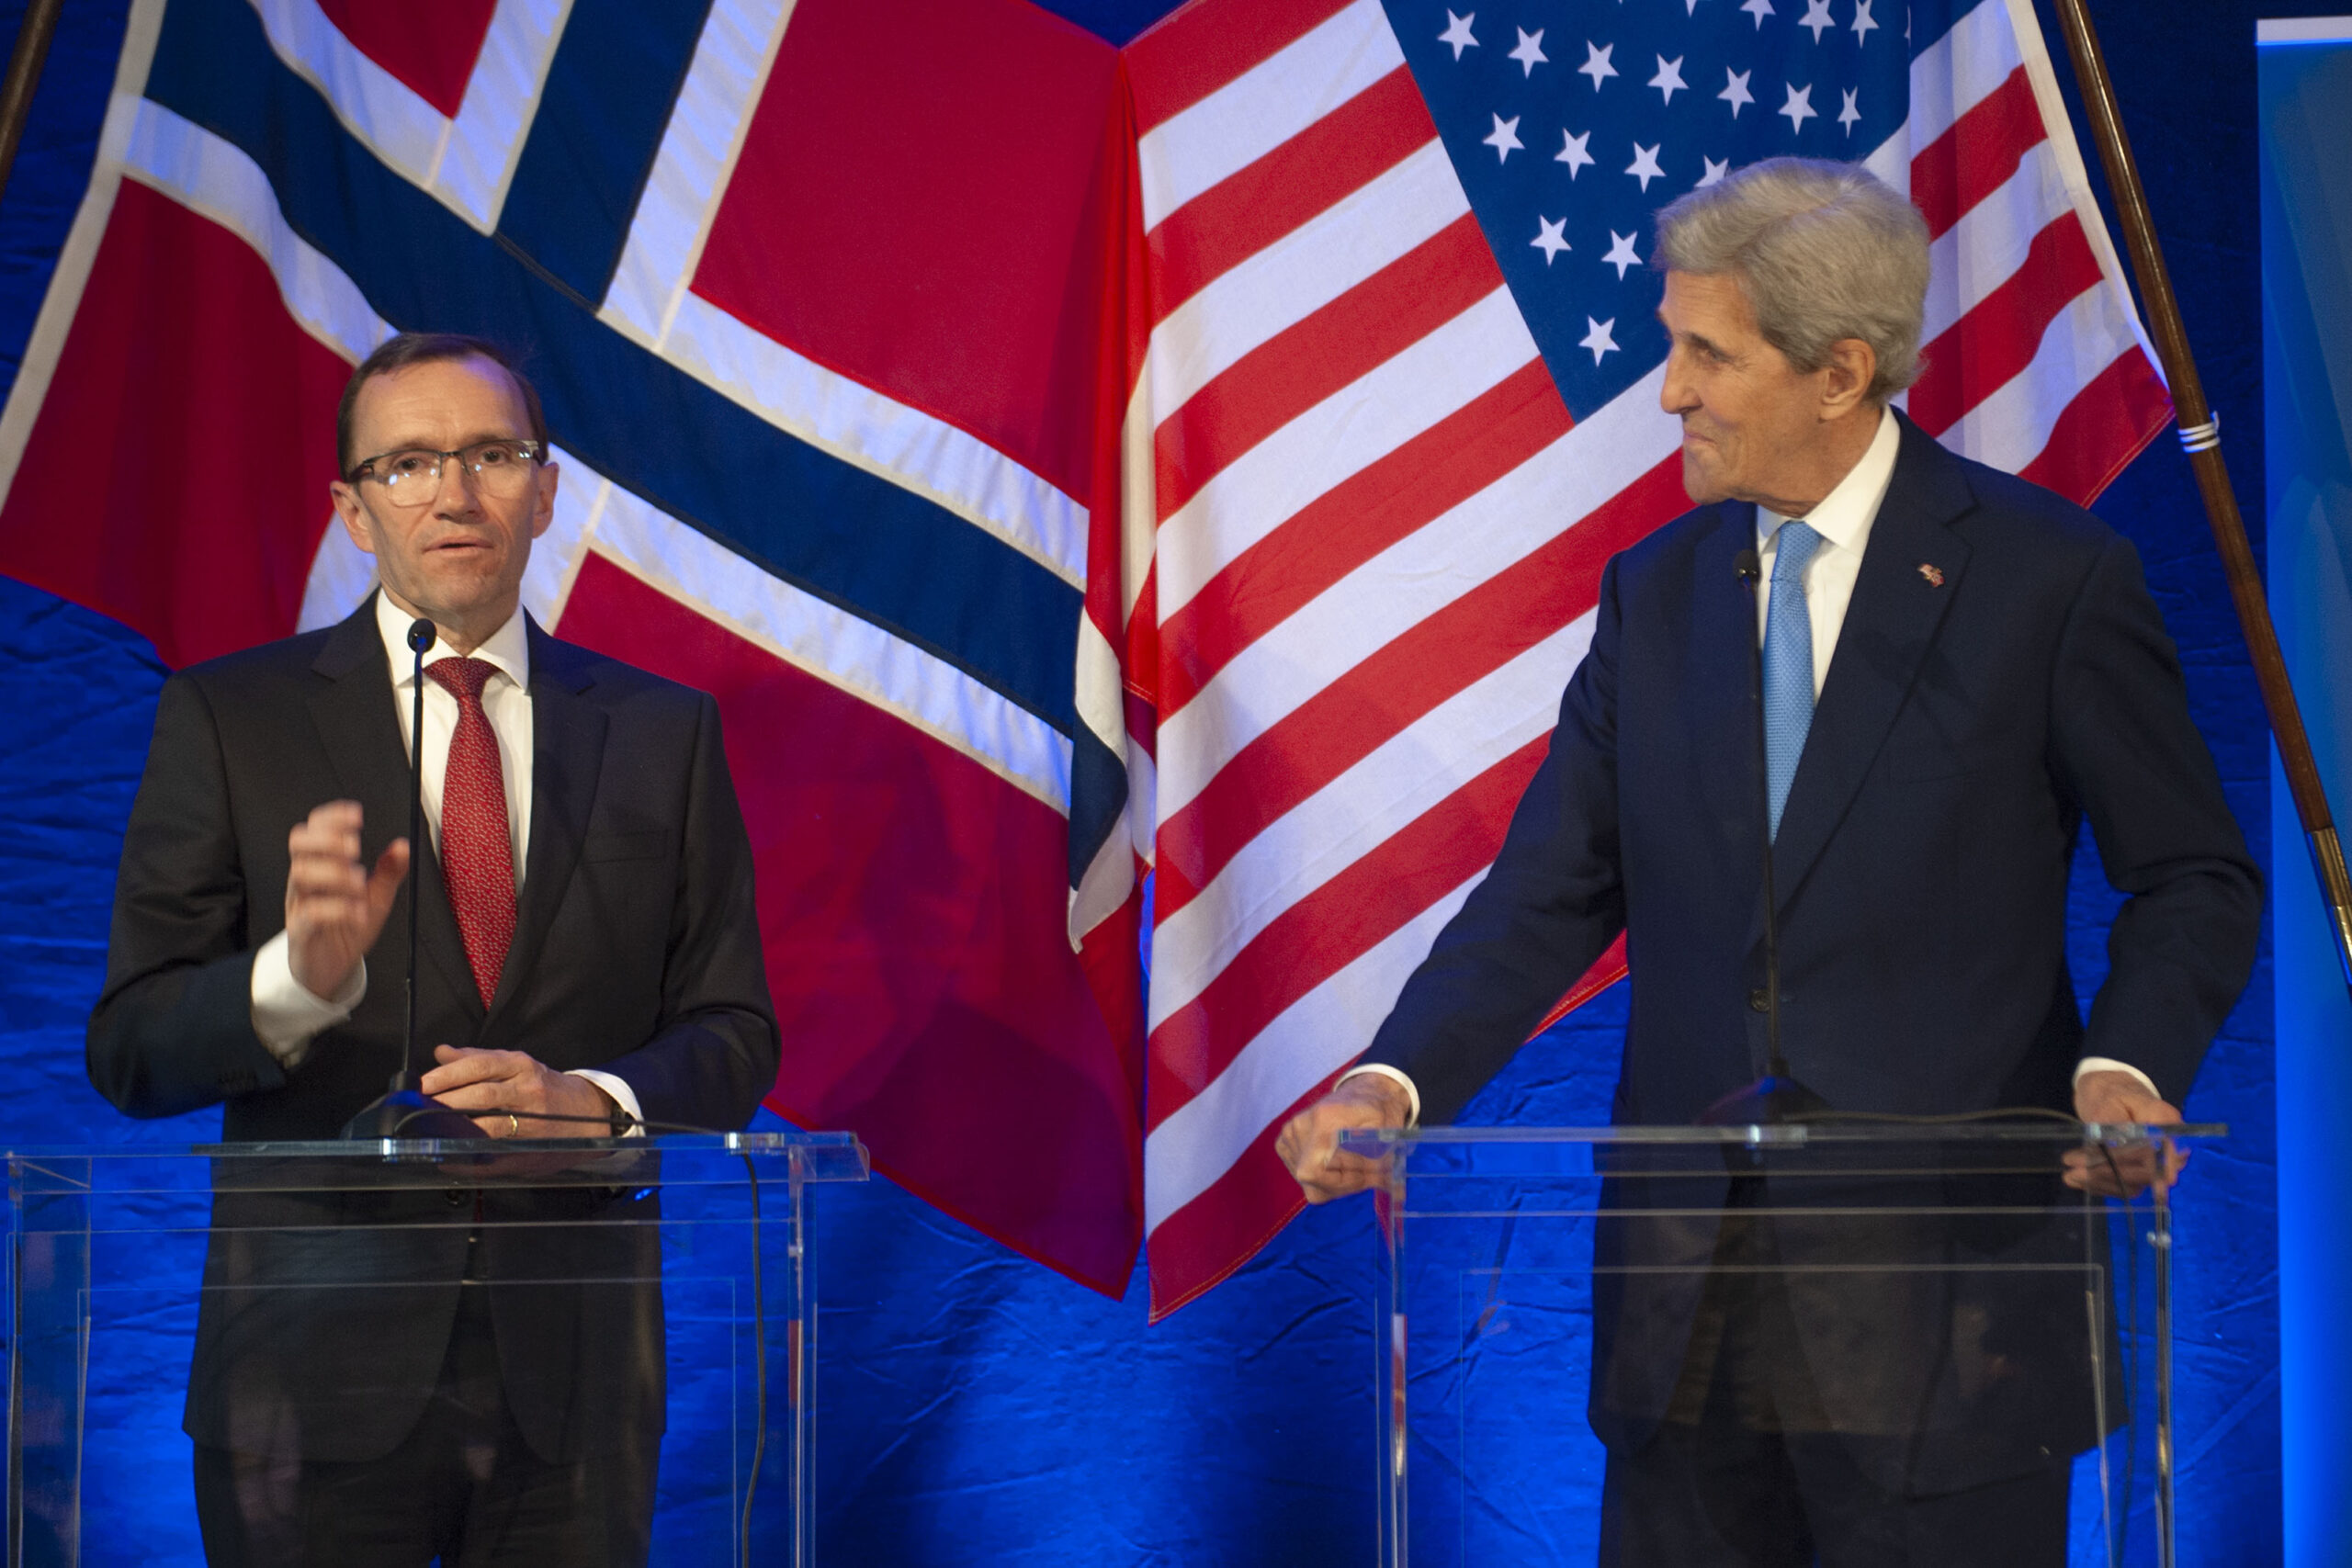 Norwegian Minister of Climate and Environment Espen Barth Eide and US Climate Envoy John Kerry during the Ministry of Climate and Environment's 50th anniversary on May 6, 2022. Photo: Ken Opprann